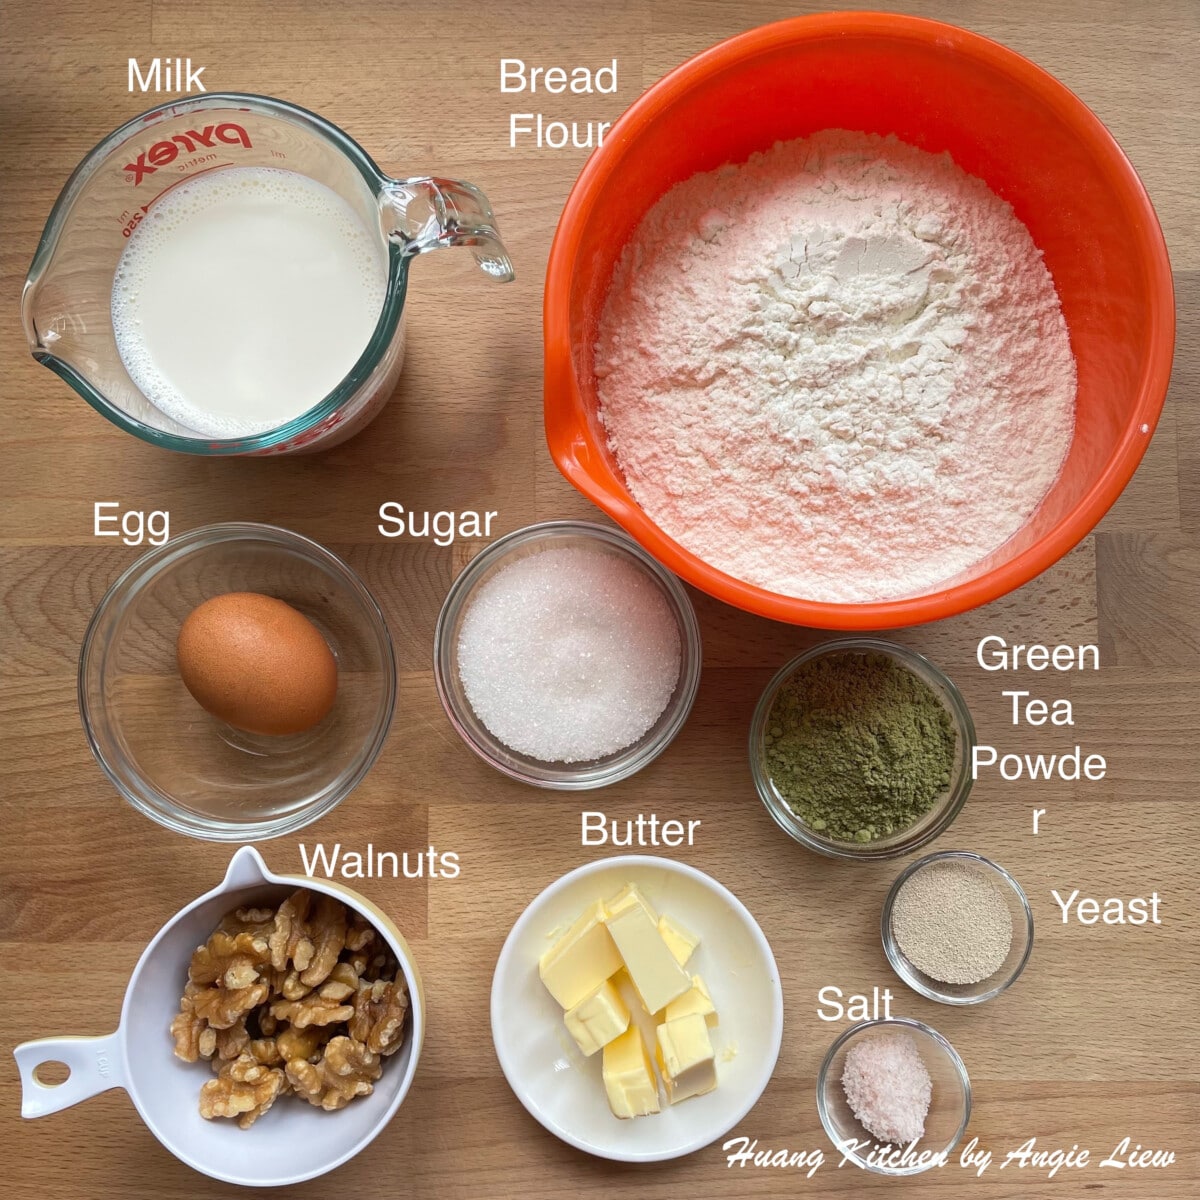 Prepare ingredients for matcha bread.